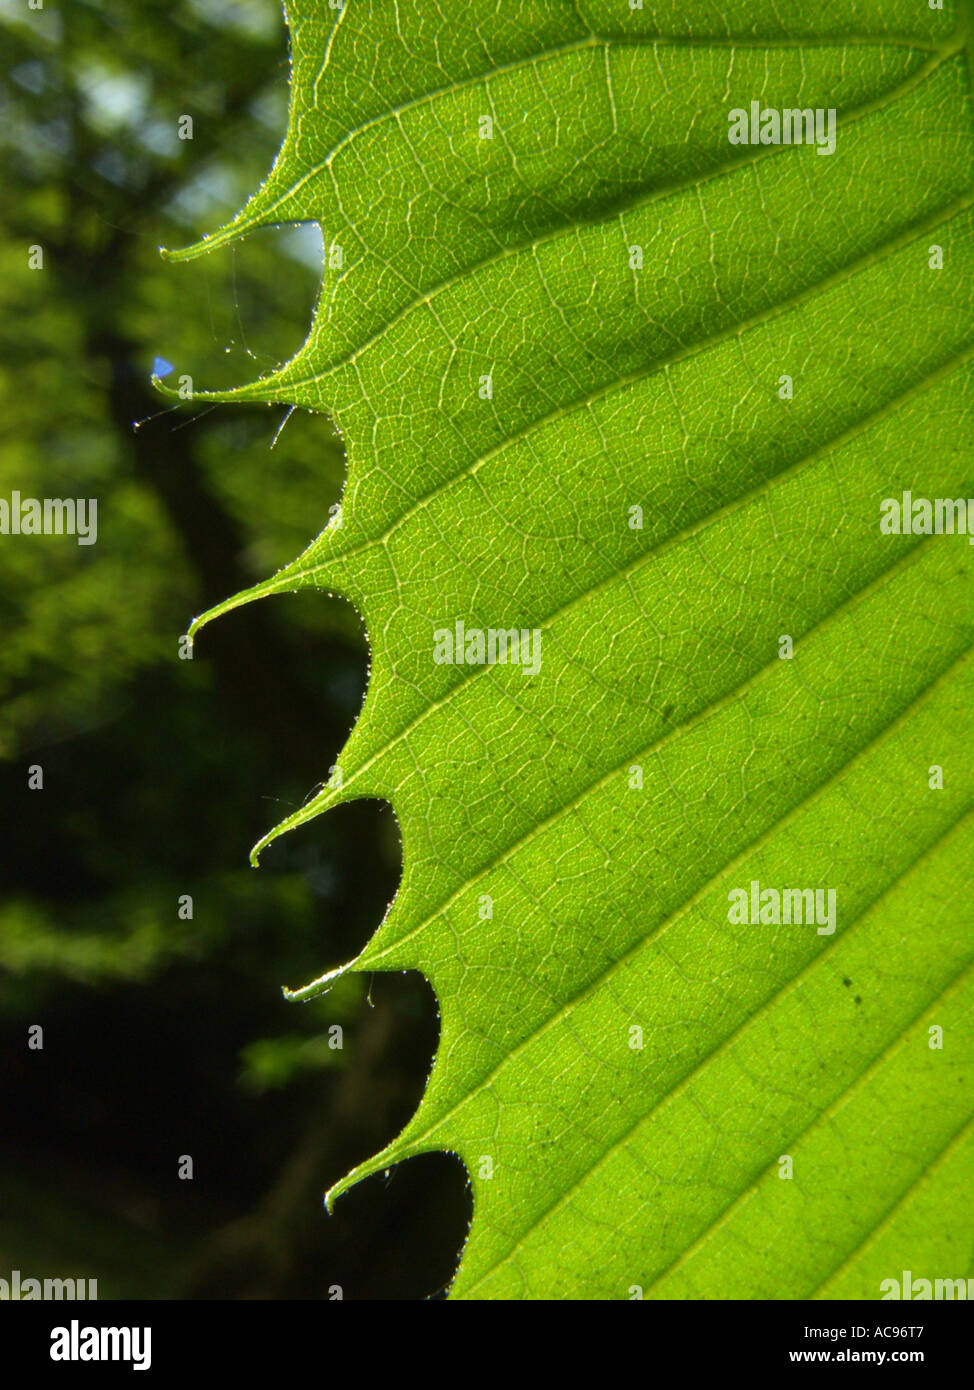 Spanish chestnut, sweet chestnut (Castanea sativa), margin of a young leaf in backlight Stock Photo